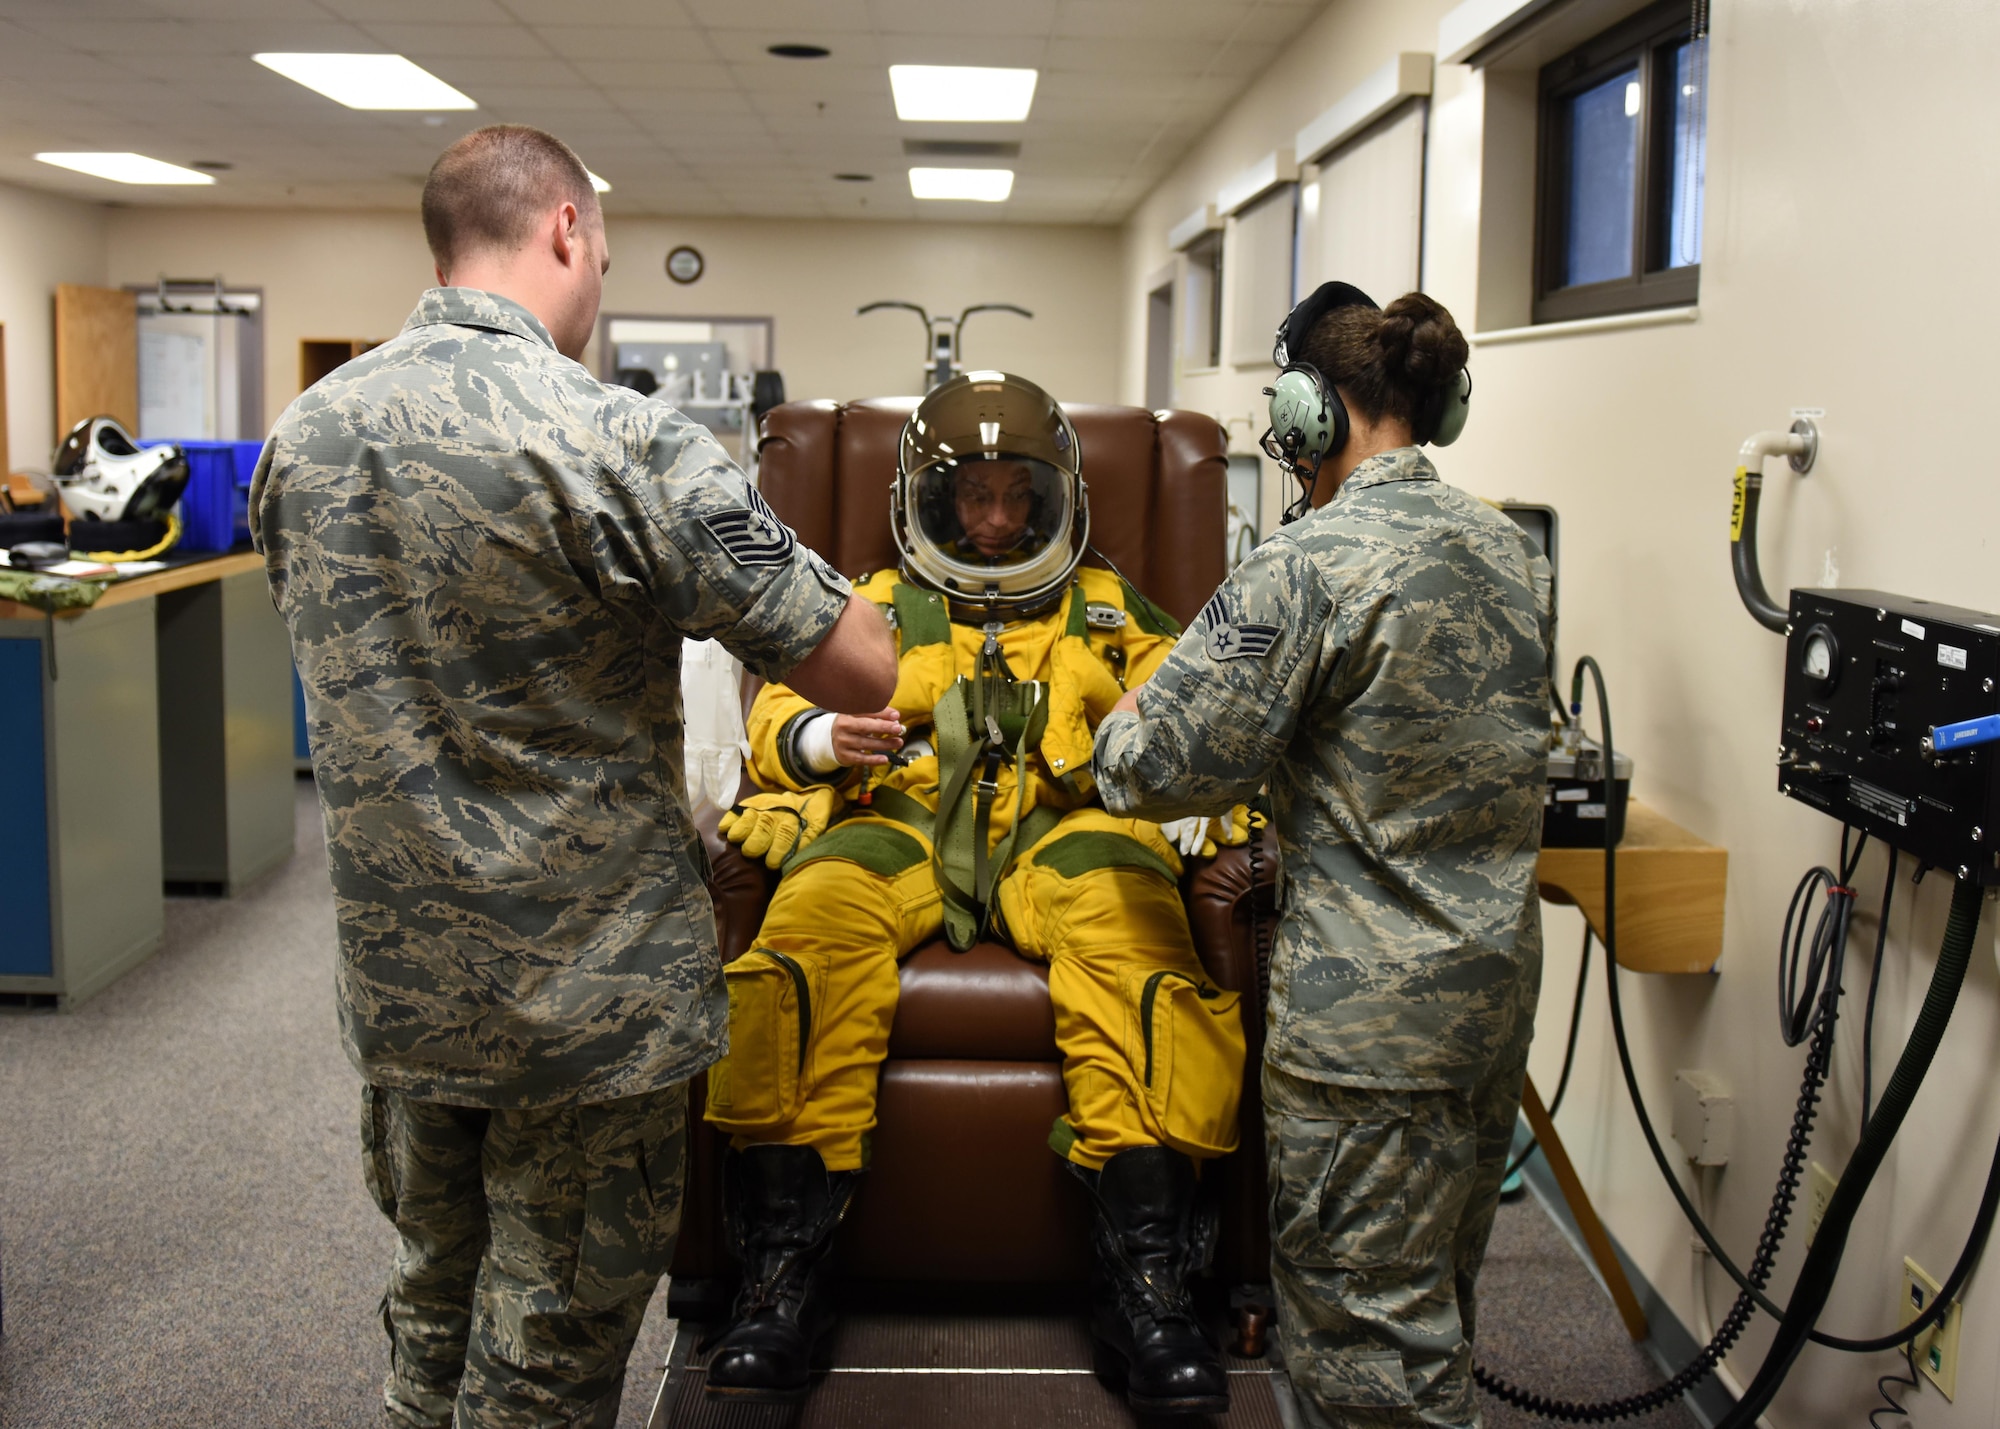 Tech. Sgt. Shawn Rose (left), and Senior Airman Christian Mitchell, 9th Physiological Support Squadron aerospace physiology technicians, assist Lt. Col. Nicole Mann, United States Marine Corps, NASA astronaut, with a full-pressure suit July 7, 2016, at Beale Air Force Base, California. Mann is undergoing Space Flight Readiness Training. (U.S. Air Force photo/ Senior Airman Bobby Cummings)